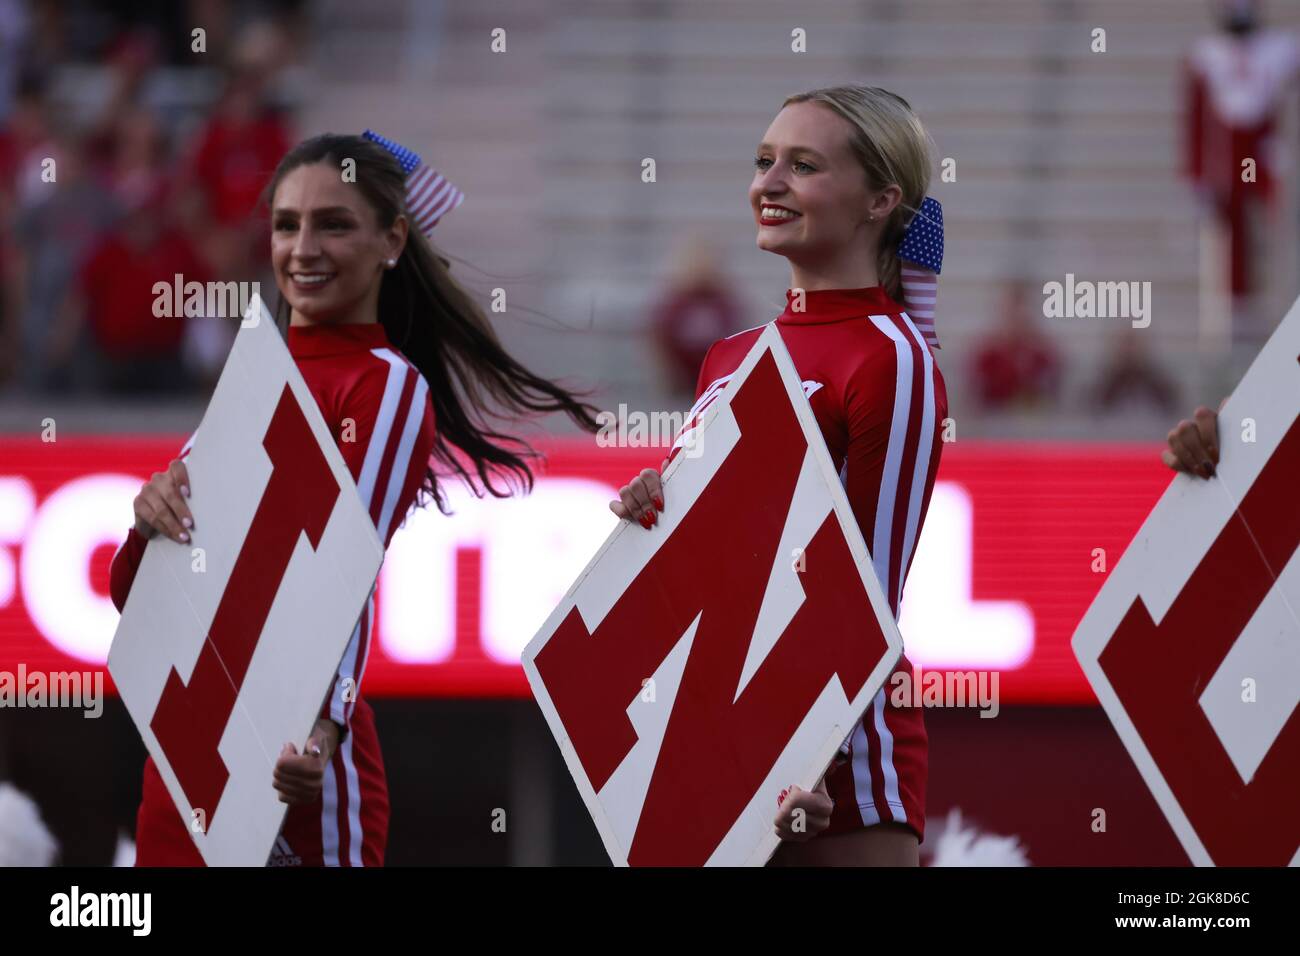 BLOOMINGTON, UNITED STATES - 2021/09/11: Indiana University cheerleaders lead a cheer before IU plays against Idaho during an NCAA football game on September 11, 2021 at Memorial Stadium in Bloomington, Ind. The Hoosiers beat the Vandals 56-14. Stock Photo